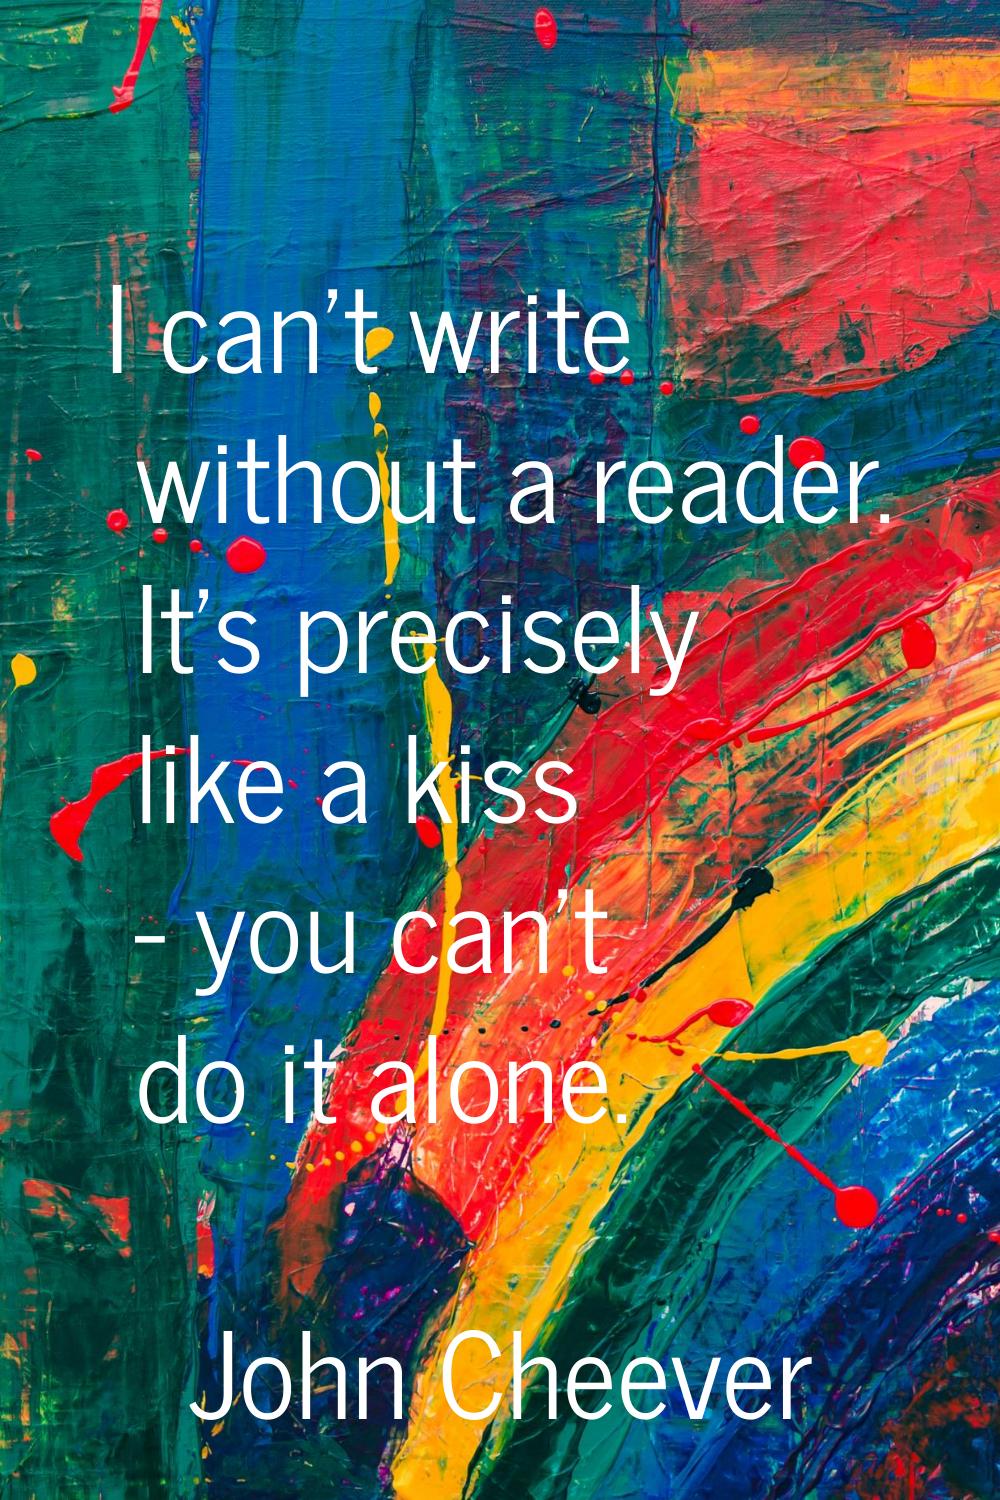 I can't write without a reader. It's precisely like a kiss - you can't do it alone.